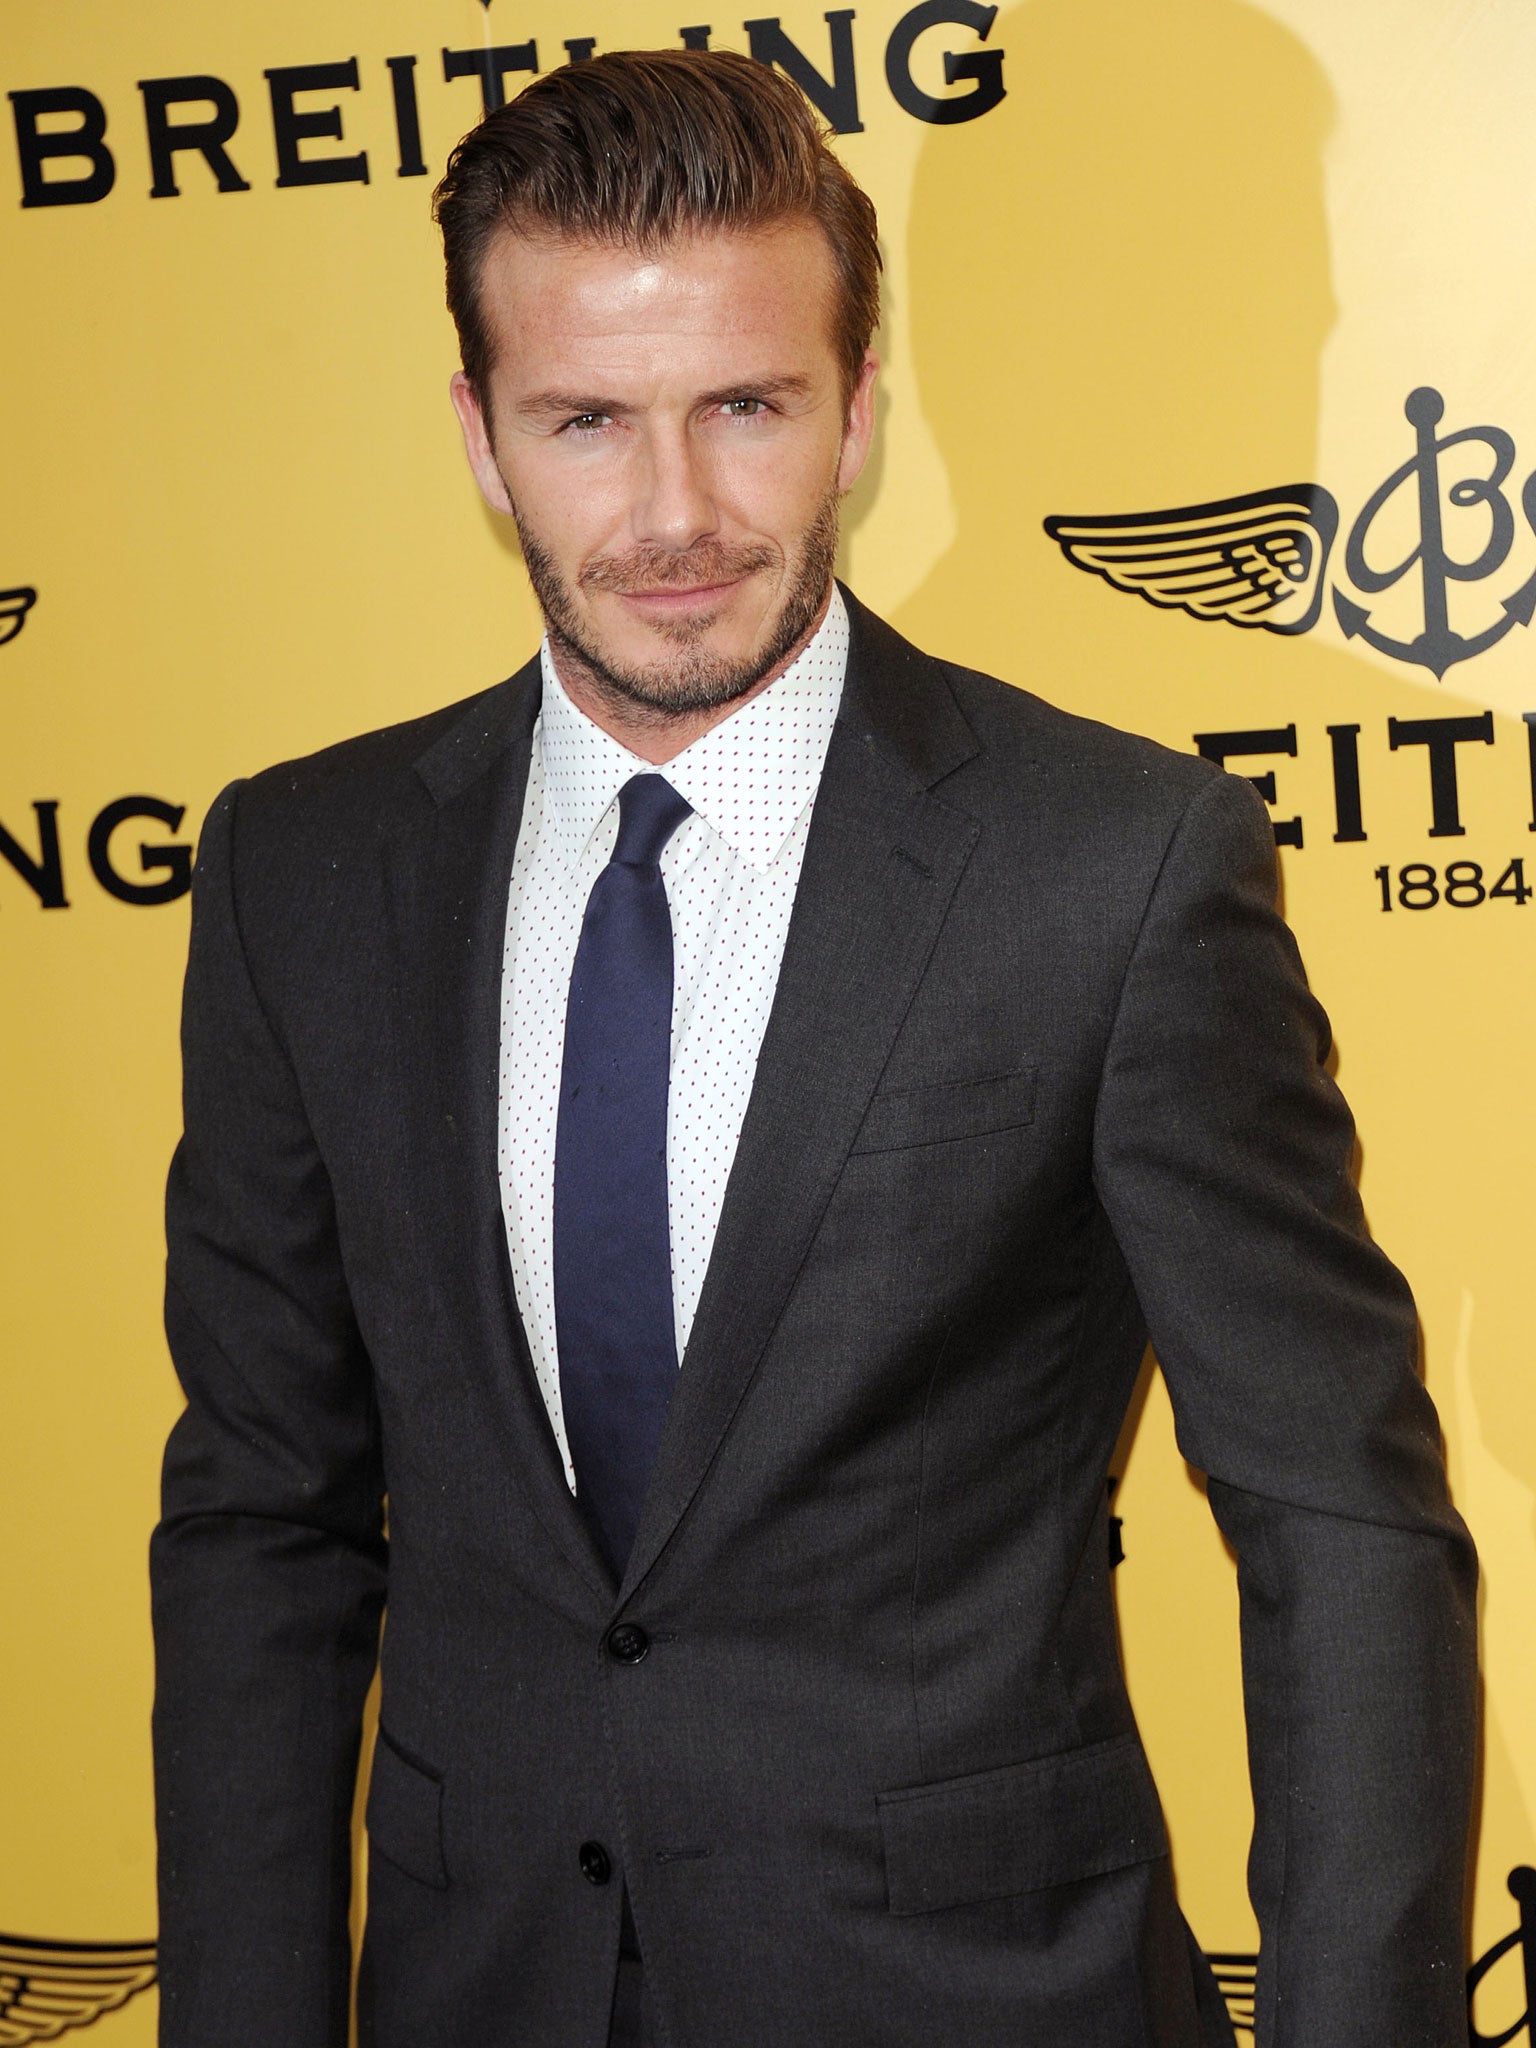 David Beckham has reportedly been involved in a car crash outside his Beverley Hills home